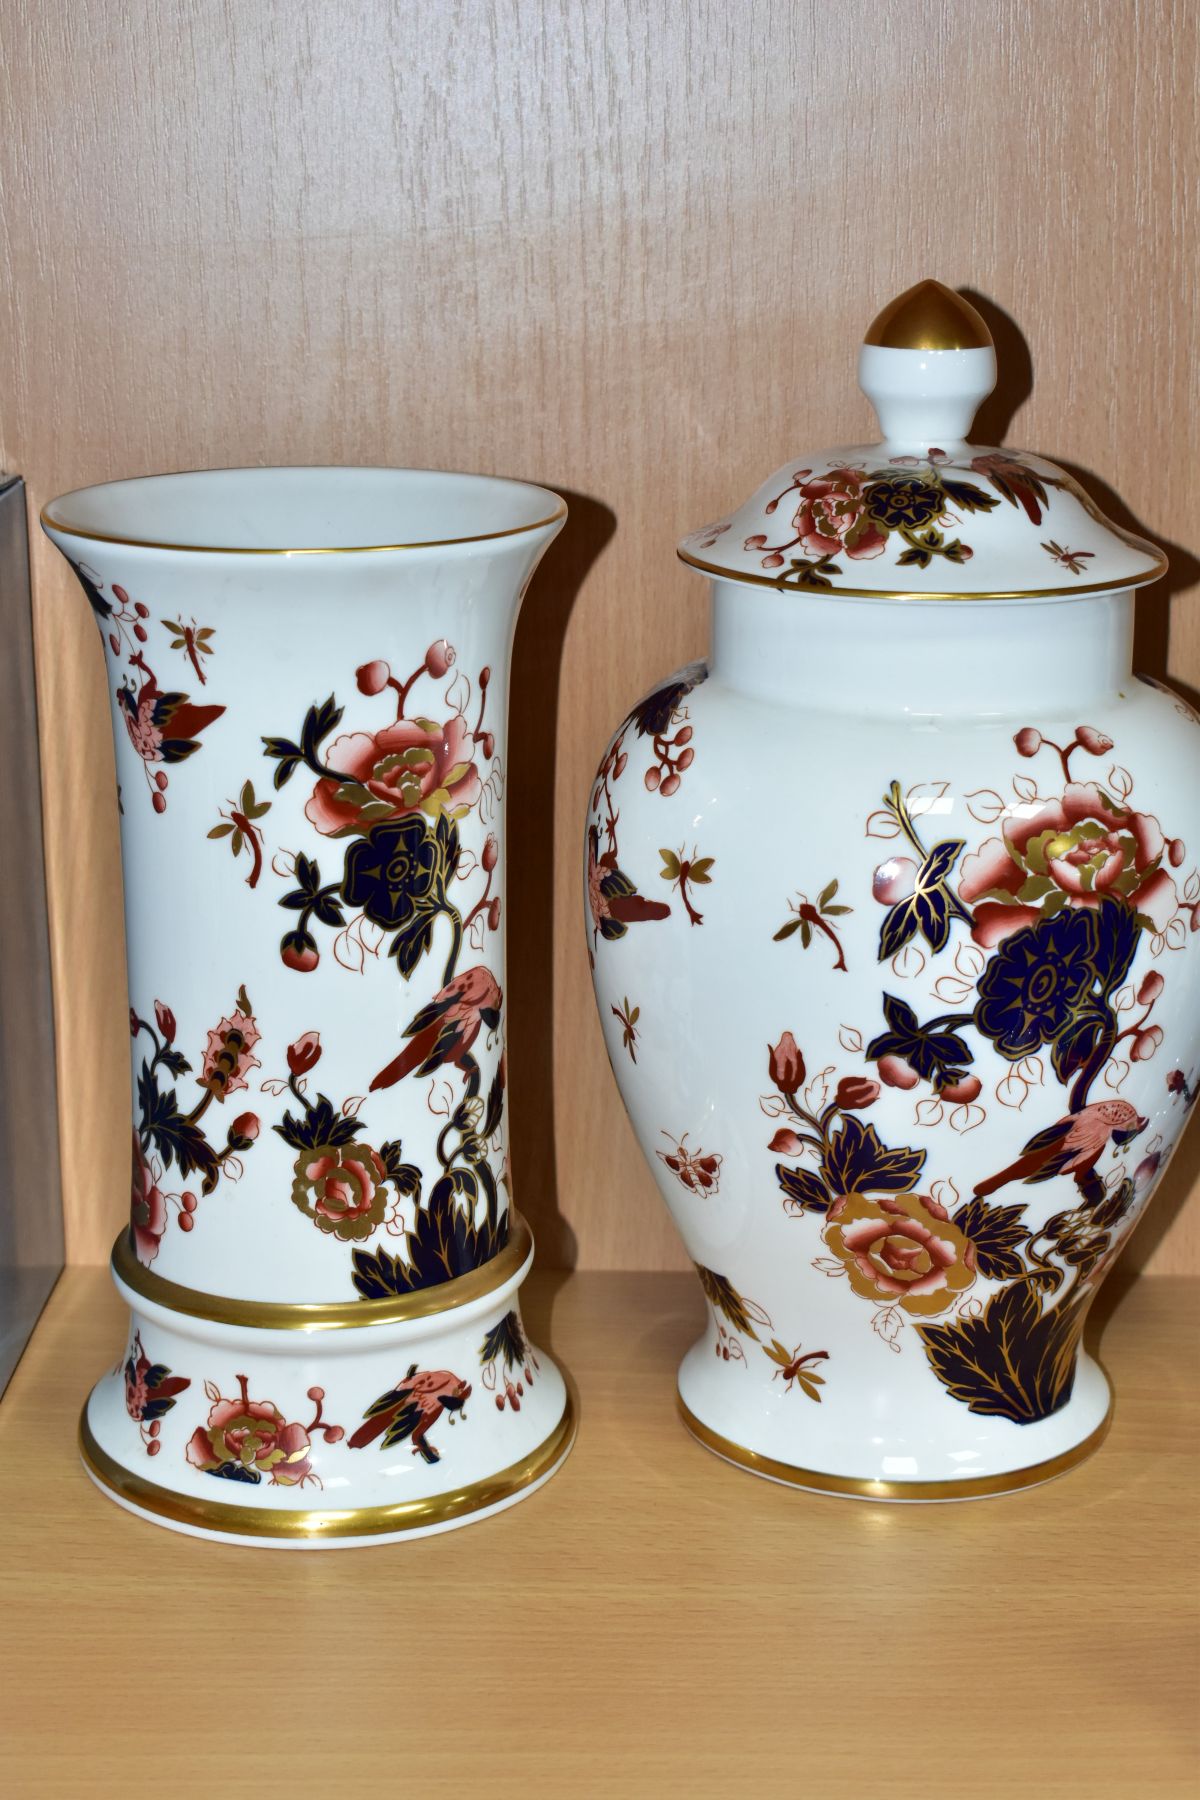 SIX PIECES OF COALPORT HONG KONG CERAMIC WARES, comprising two covered vases heights approximately - Image 6 of 8